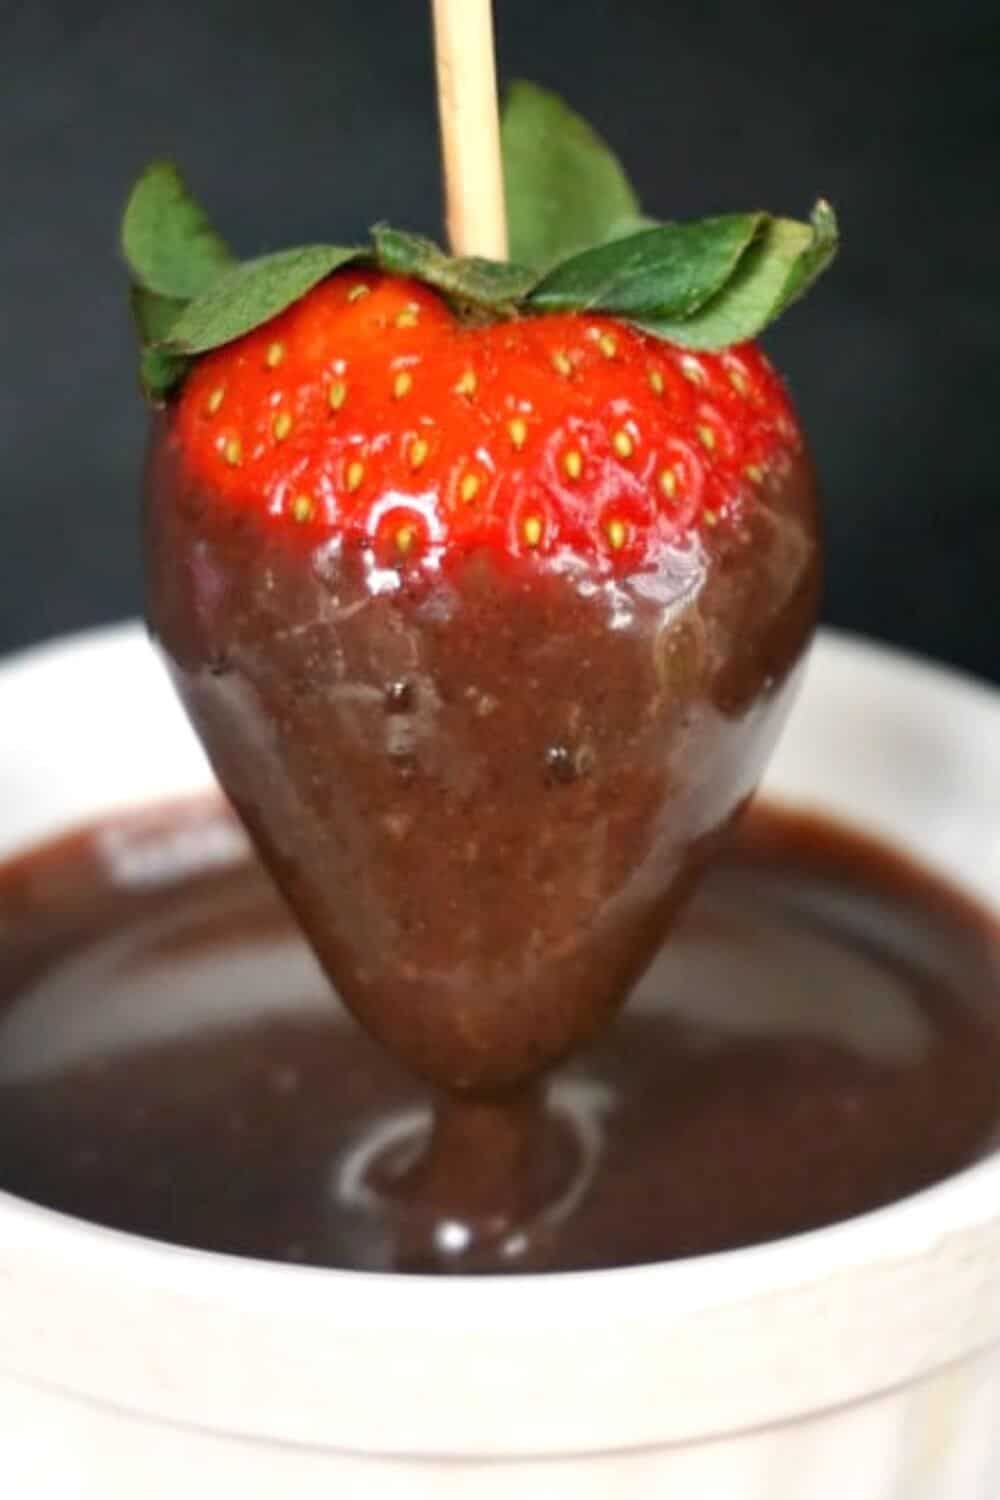 The best homemade chocolate dipping sauce that is rich, heavenly flavourful and so chocolatey. It's so easy and quick to make, and this chocolate sauce is great for fruit, strawberries in particular, churros or drizzled over ice cream or your favourite dessert. The only chocolate sauce recipe you need for a dinner date or any ther celebration. #chocolatesauce, #chocolatedippingsauce, #homemadechocolate, #chocolate